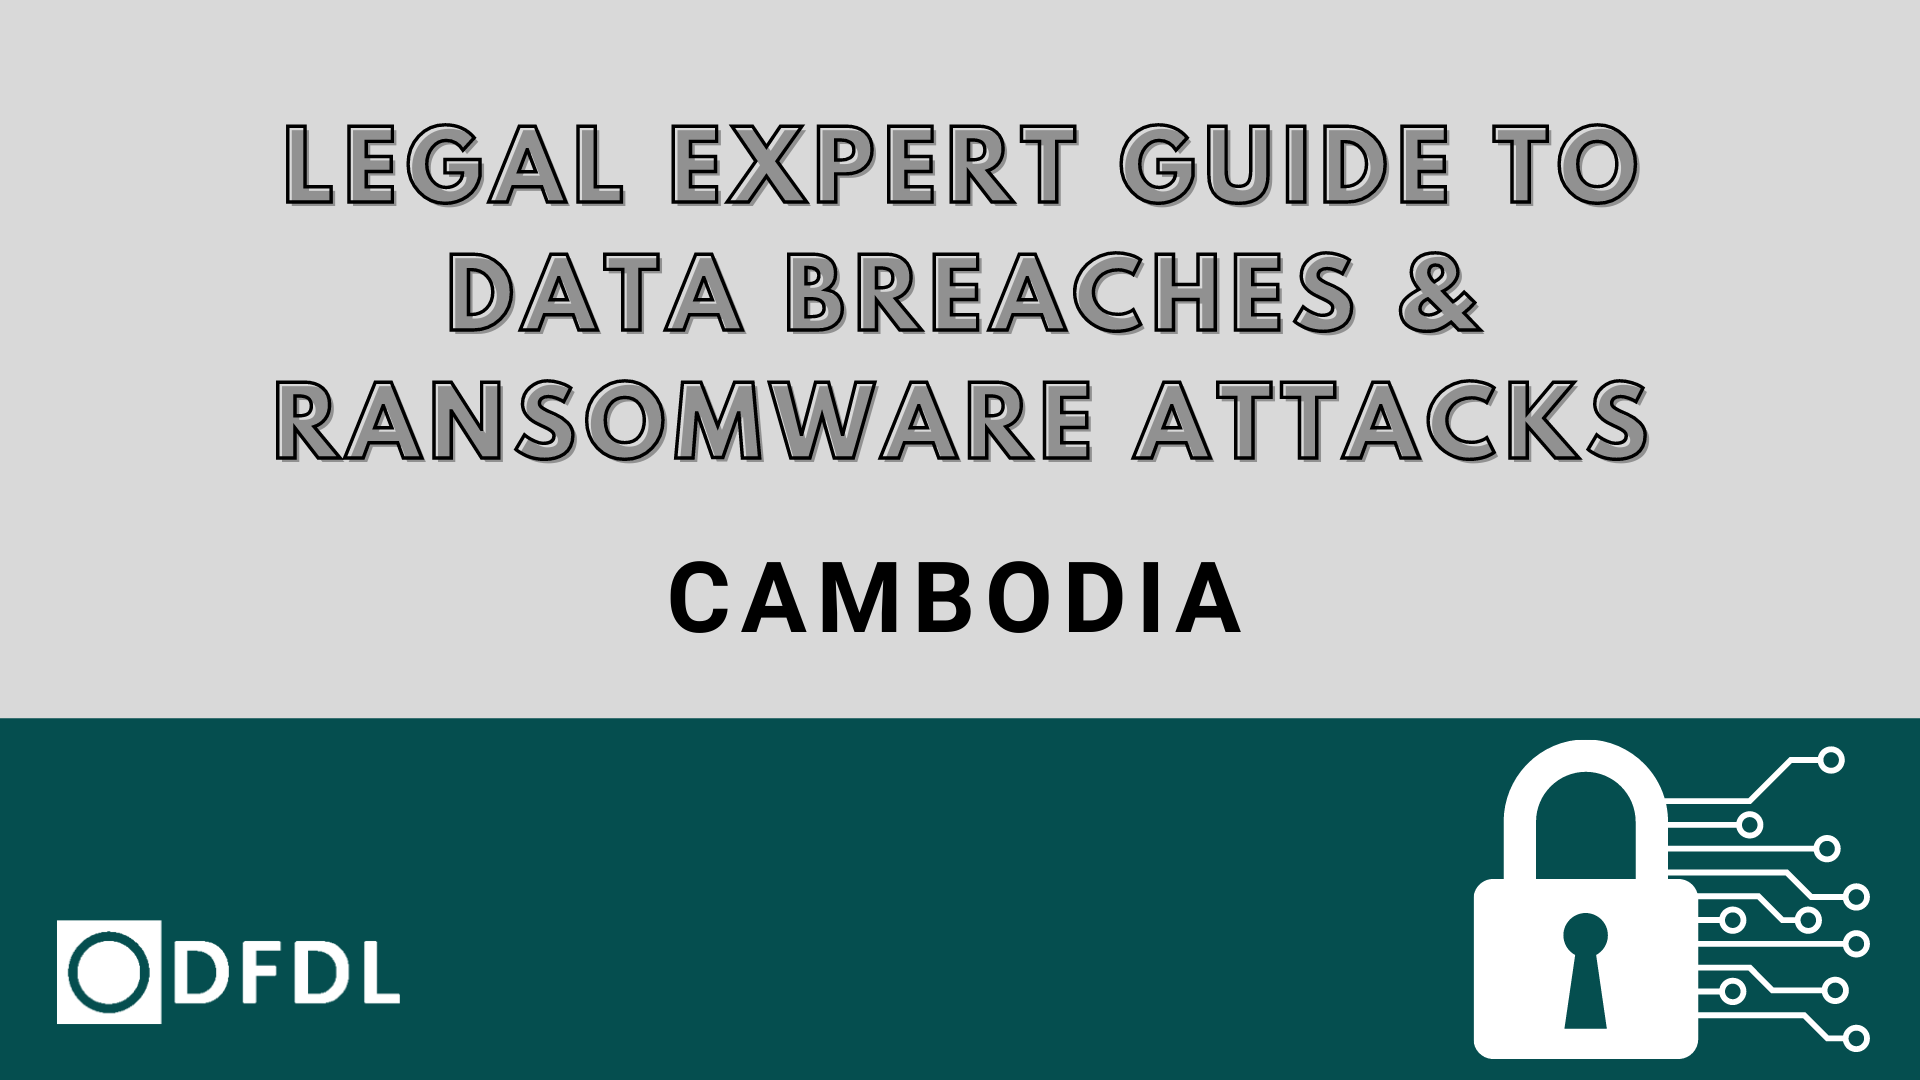 Legal Expert Guide to Data Breaches & Ransomware Attacks in Cambodia